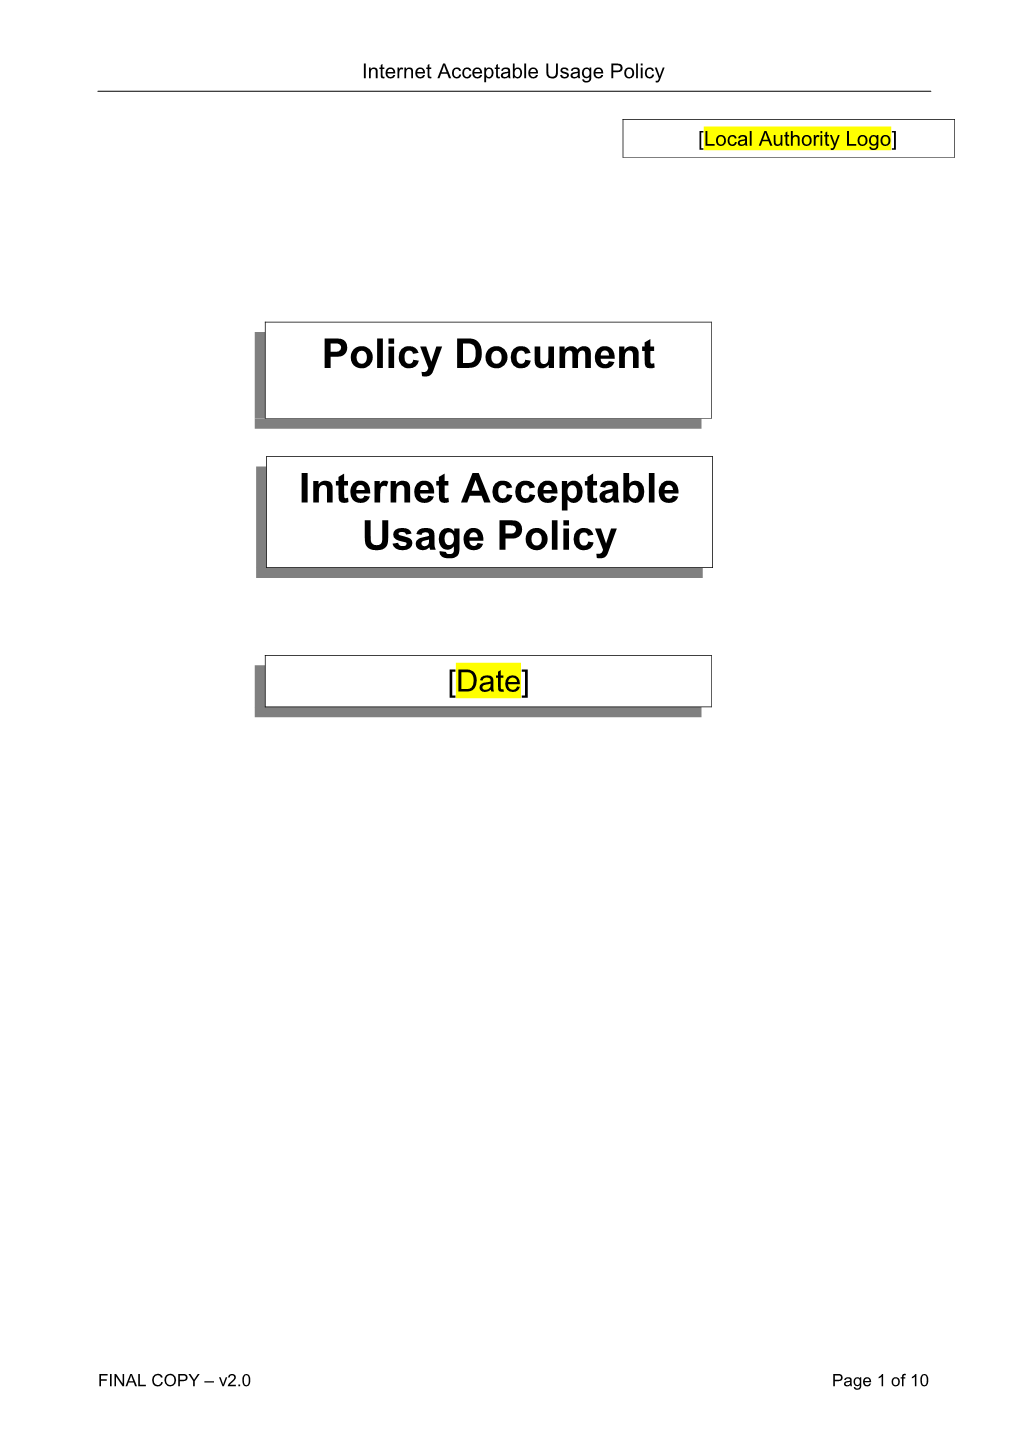 Internet Acceptable Usage Policy Template